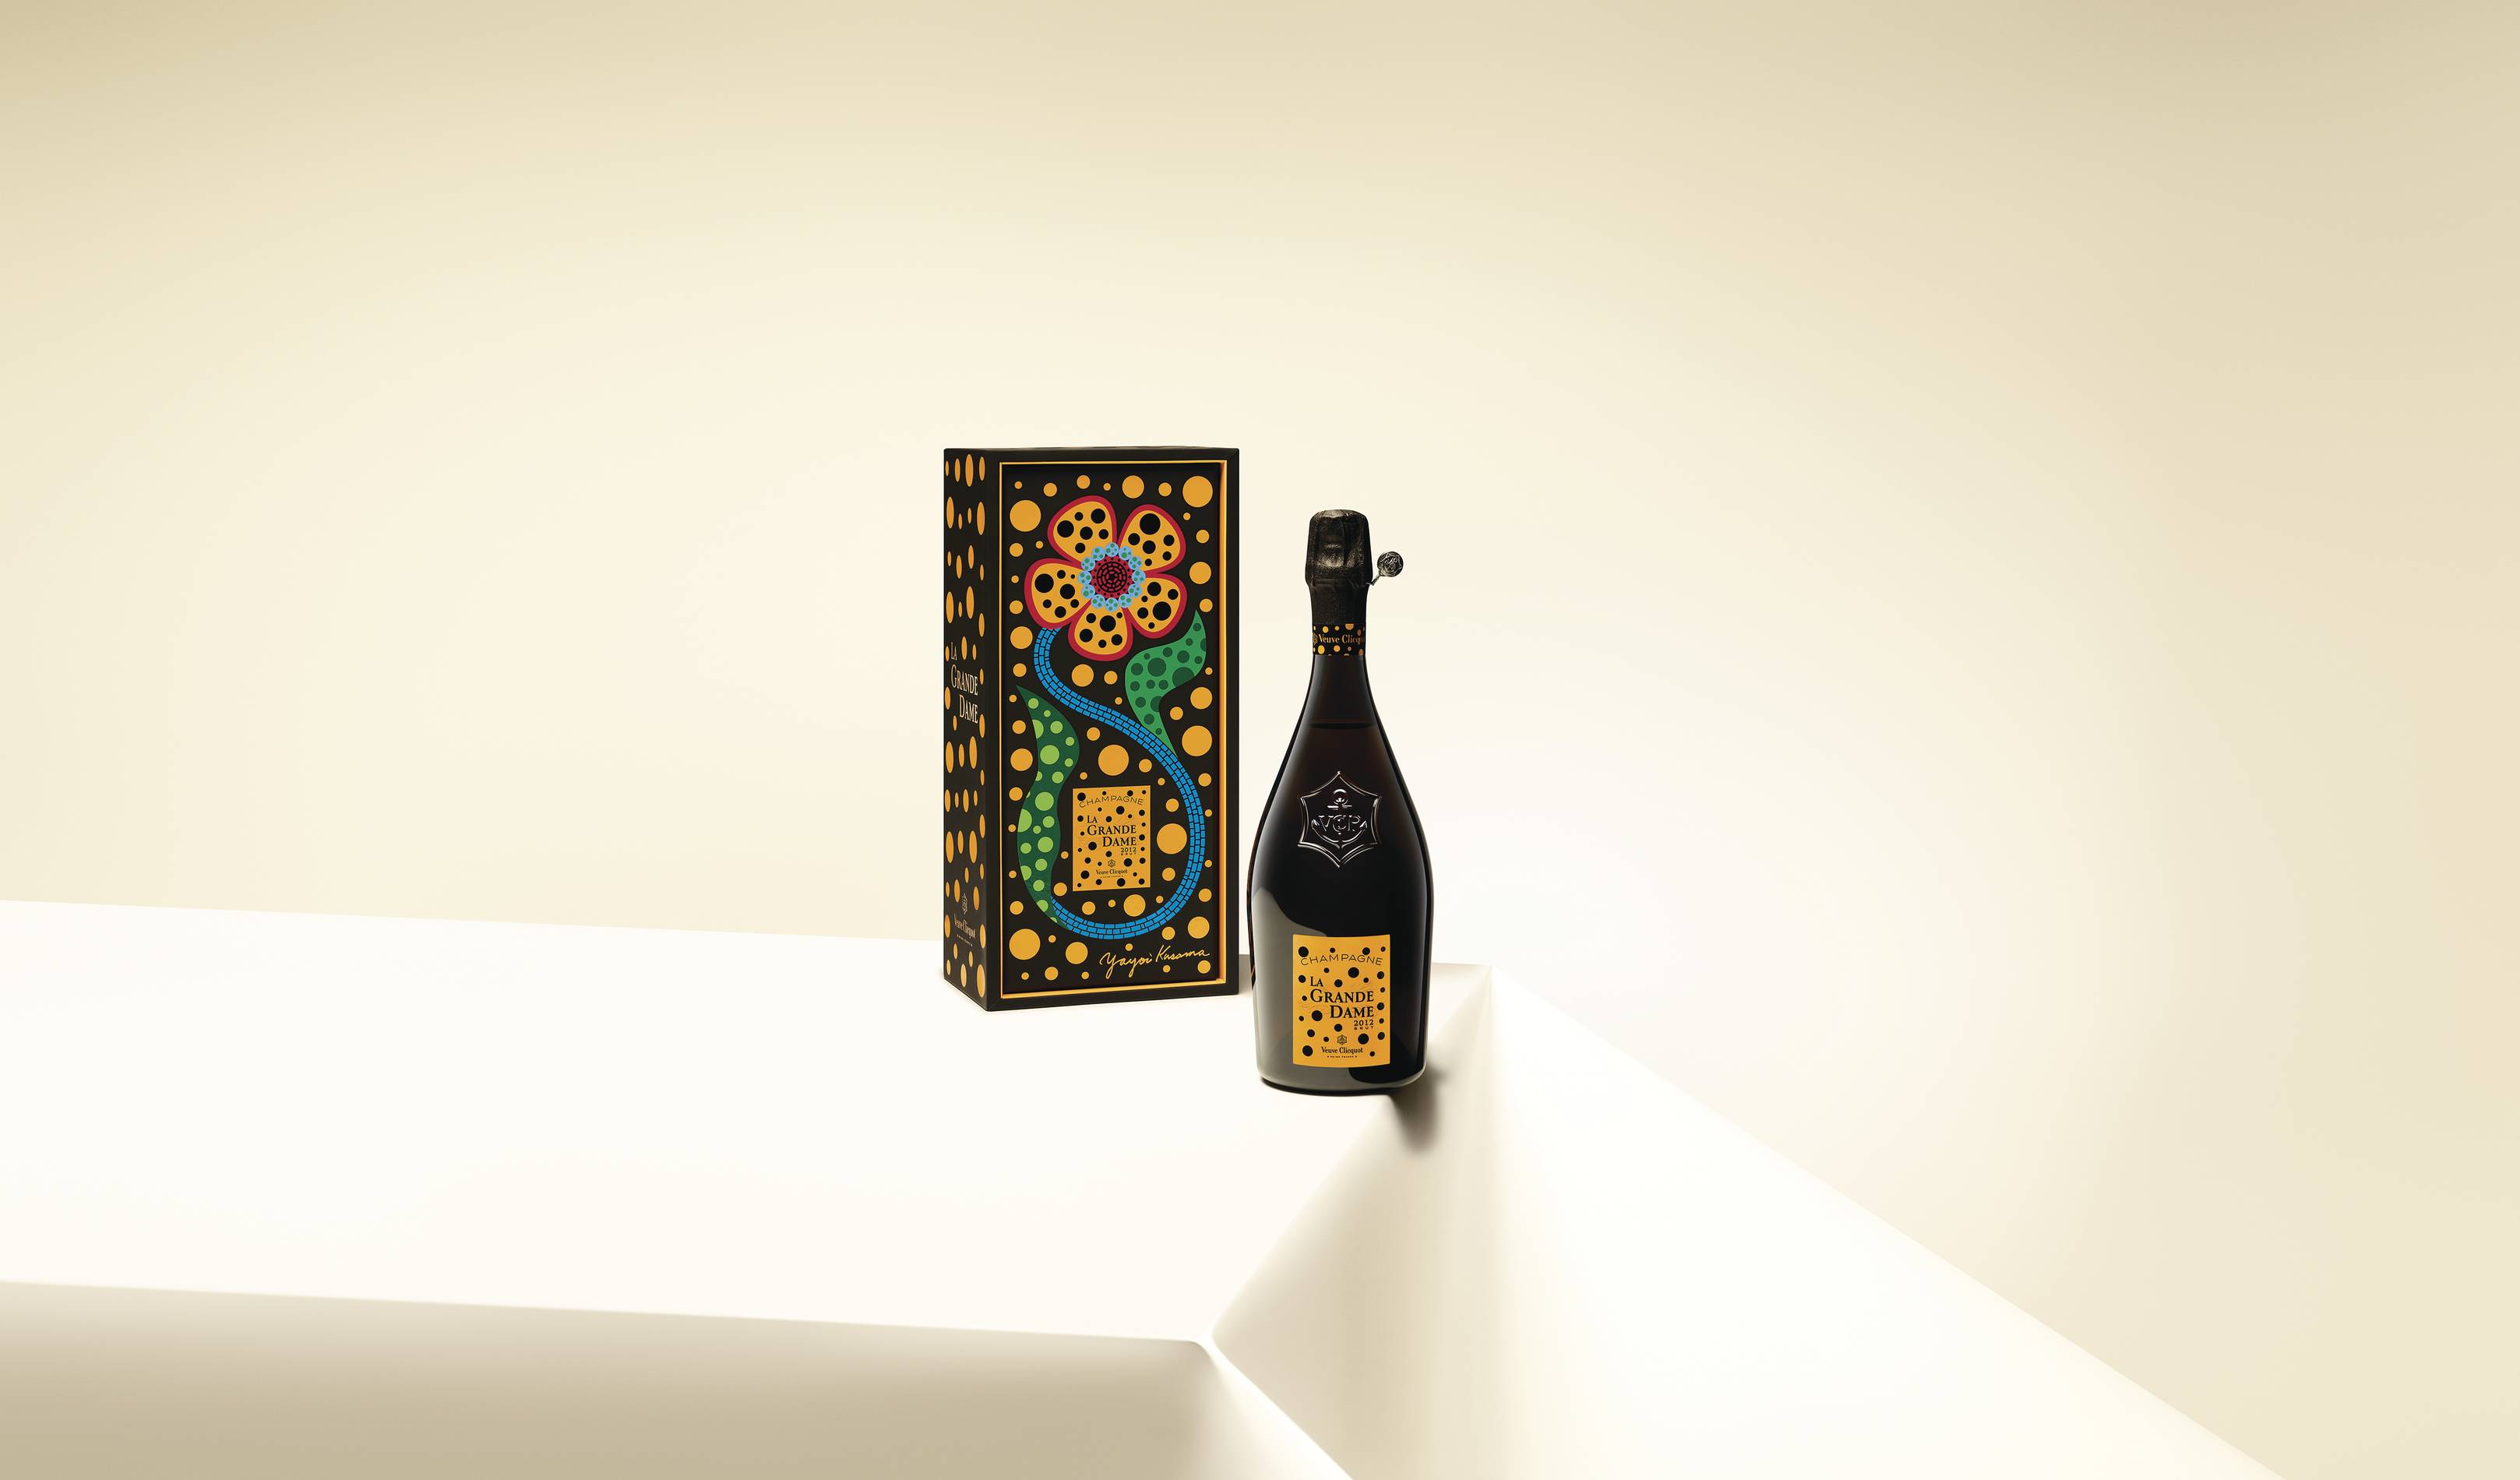 Bottle and box of wine art